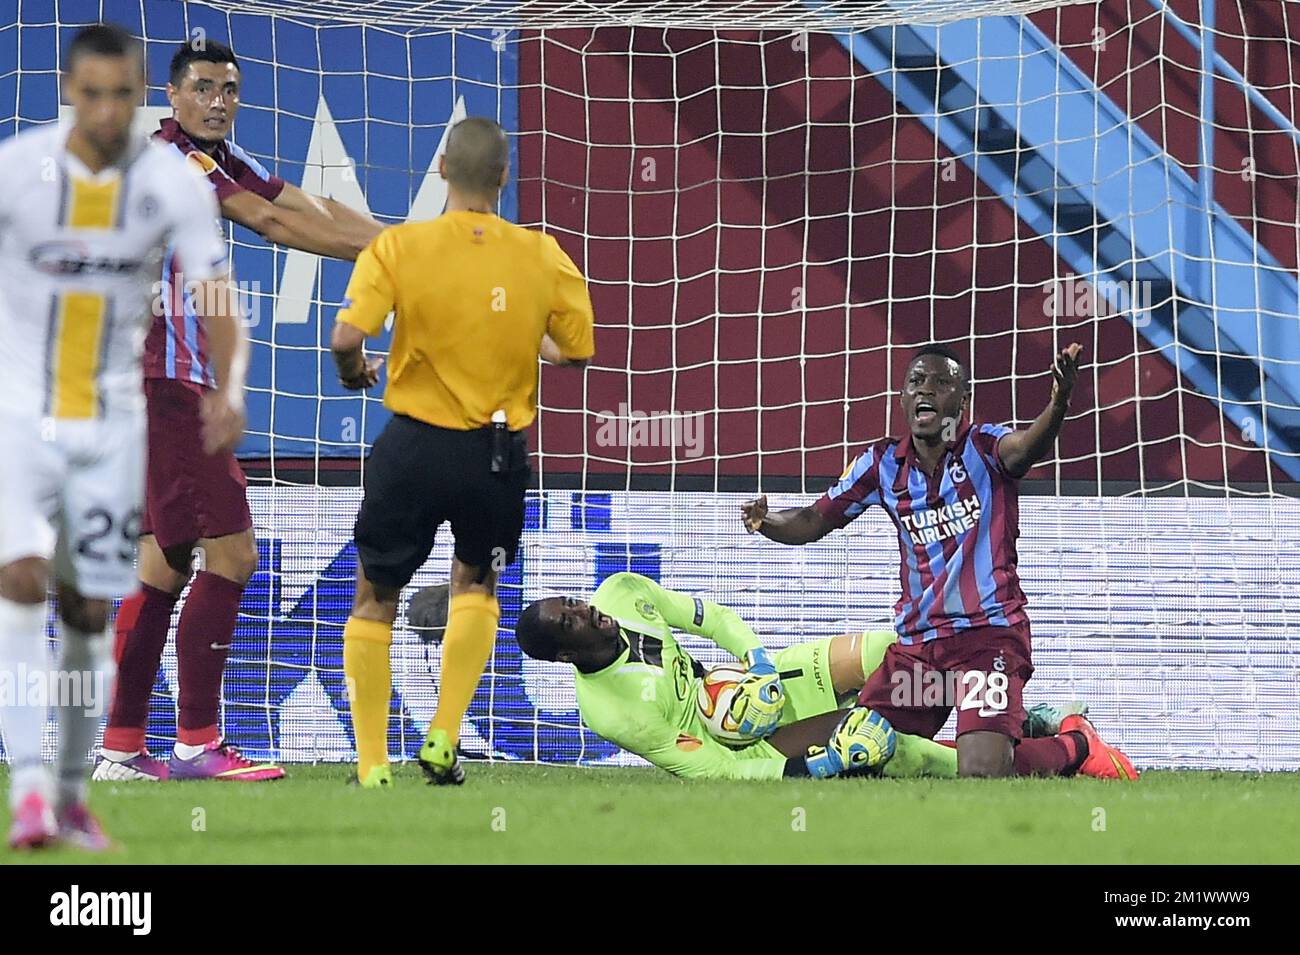 20141023 - TRABZON, TURKEY: Lokeren's goalkeeper Barry Boubacar Copa and Trabzonspor's Majeed Waris pictured during a game between Turkish club Trabzonspor AS and Belgian soccer team KSC Lokeren OVL in the Huseyin Avni Aker Stadium in Trabzon, Thursday 23 October 2014. It is the third day of the group stage of the UEFA Europa League competition, in group L. BELGA PHOTO YORICK JANSENS Stock Photo